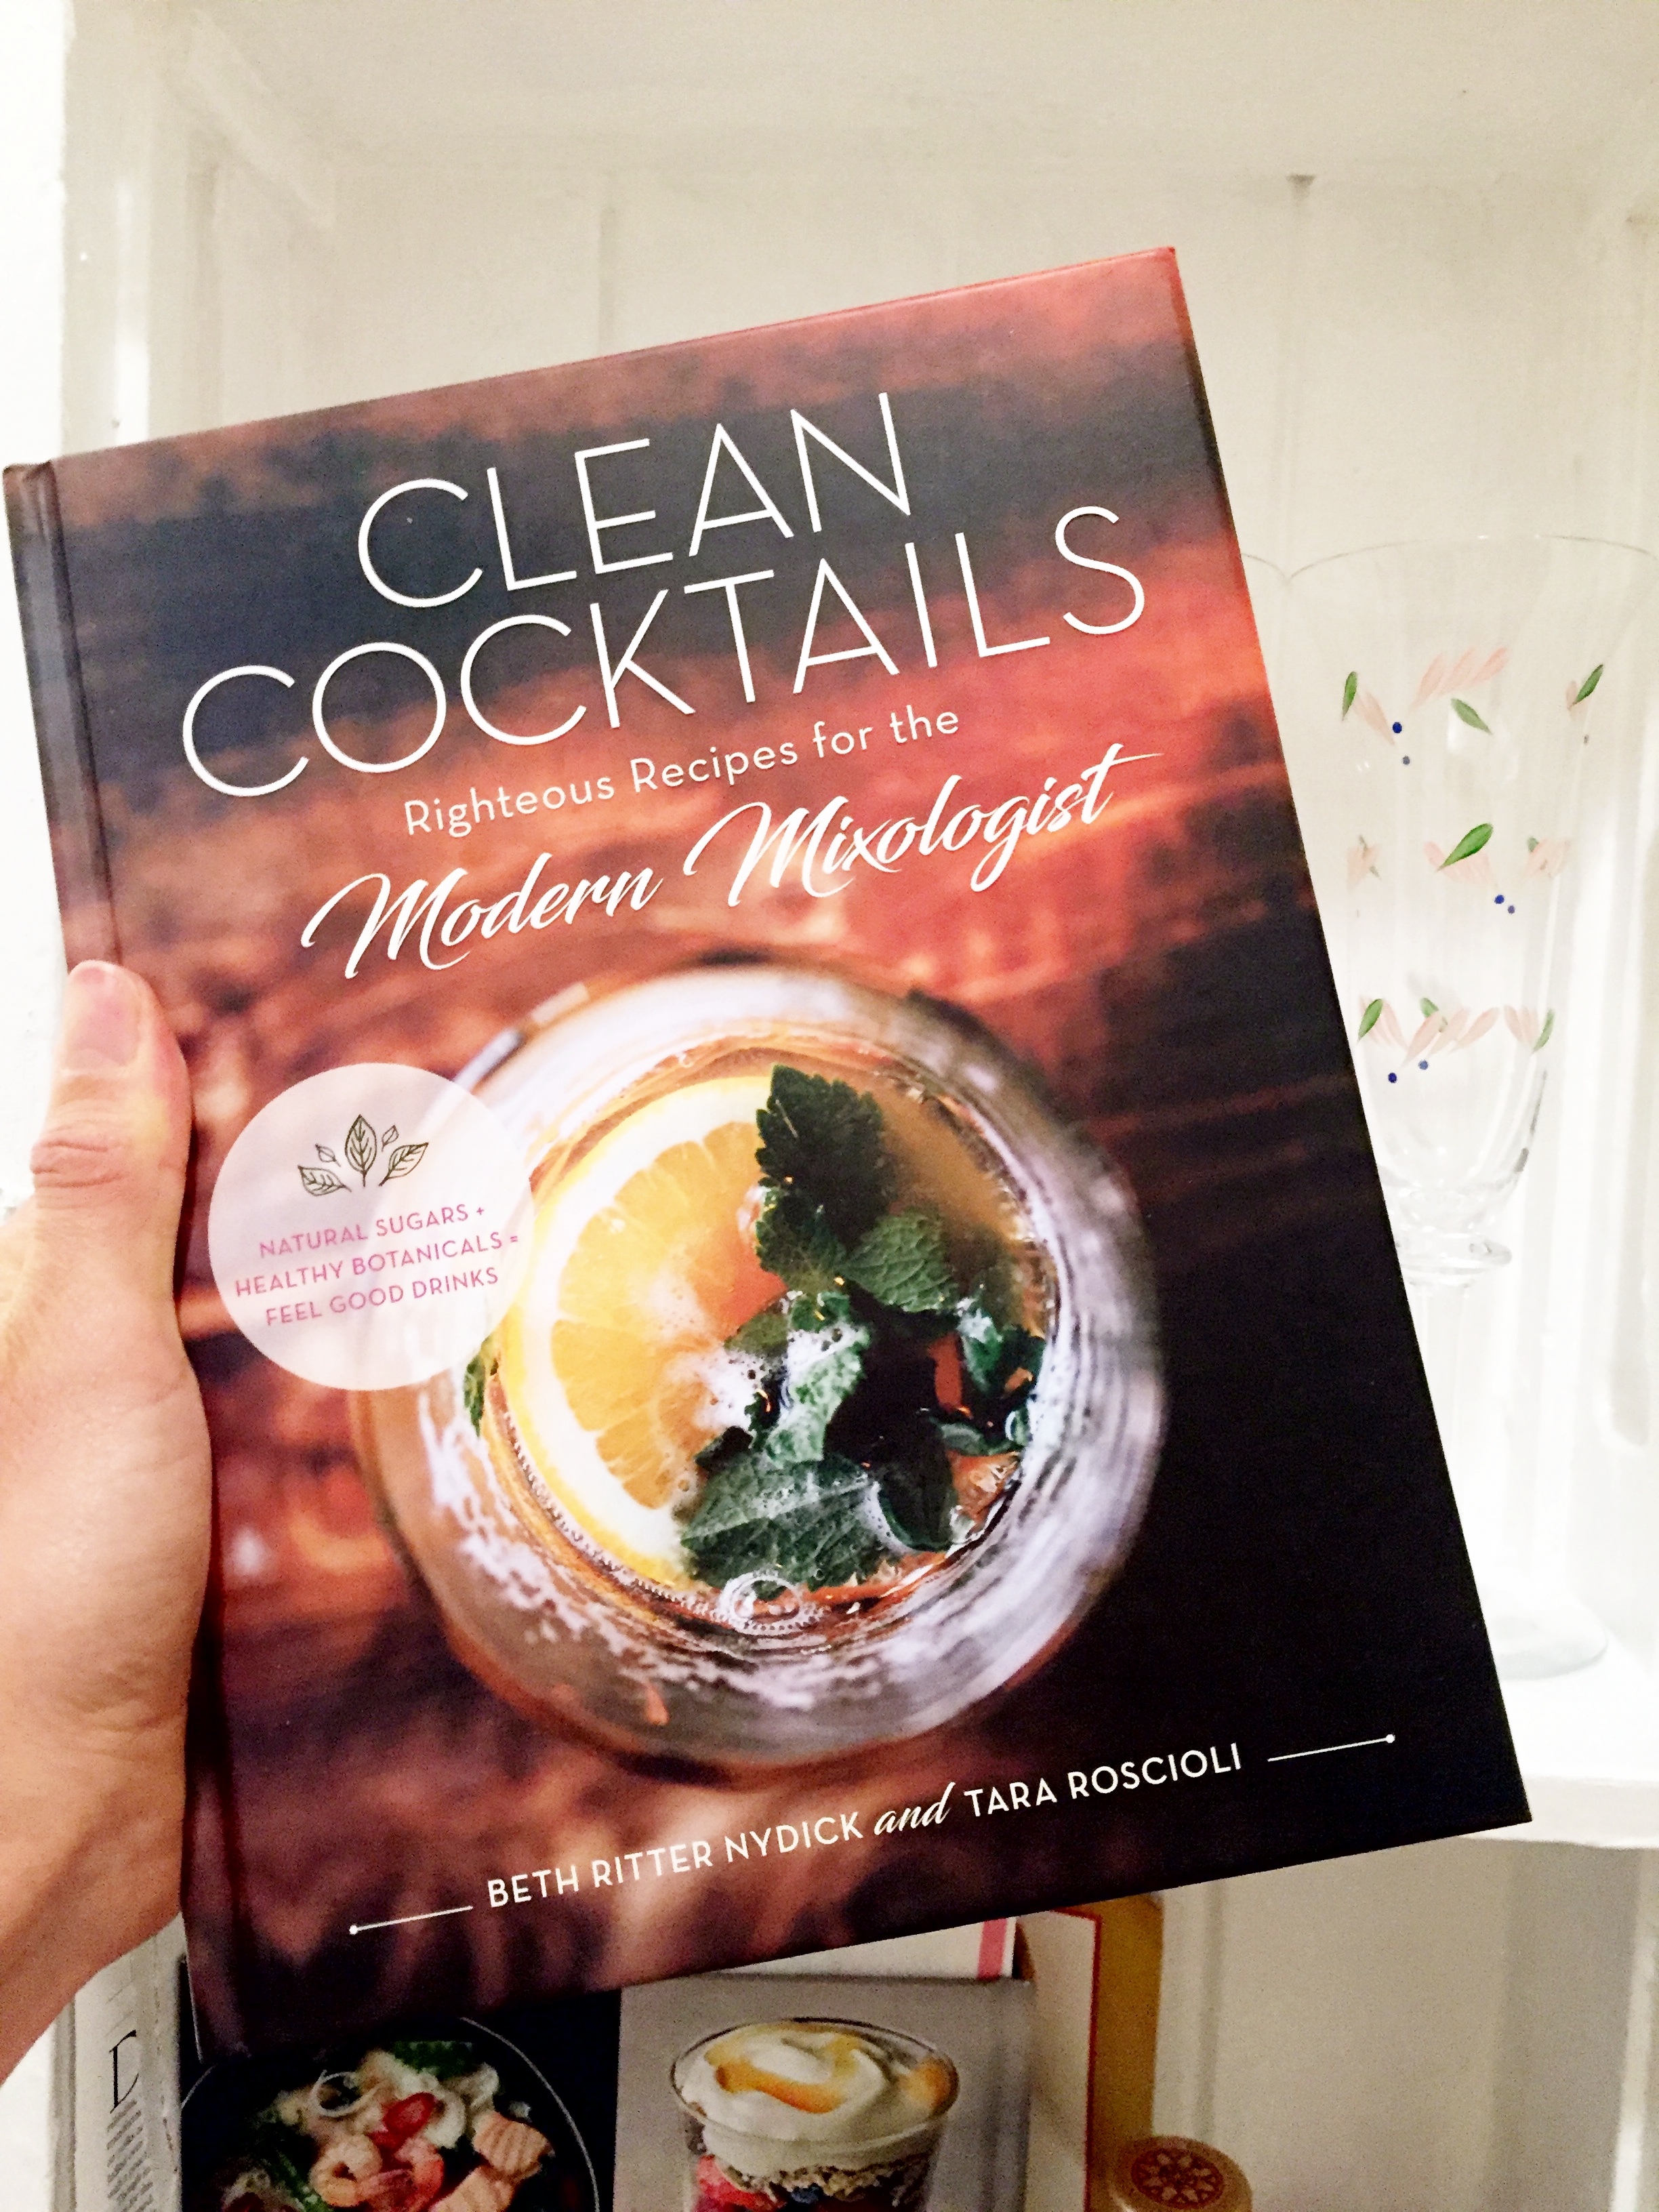 Clean Cocktails: Righteous Recipes for the Modern Mixologist $24 